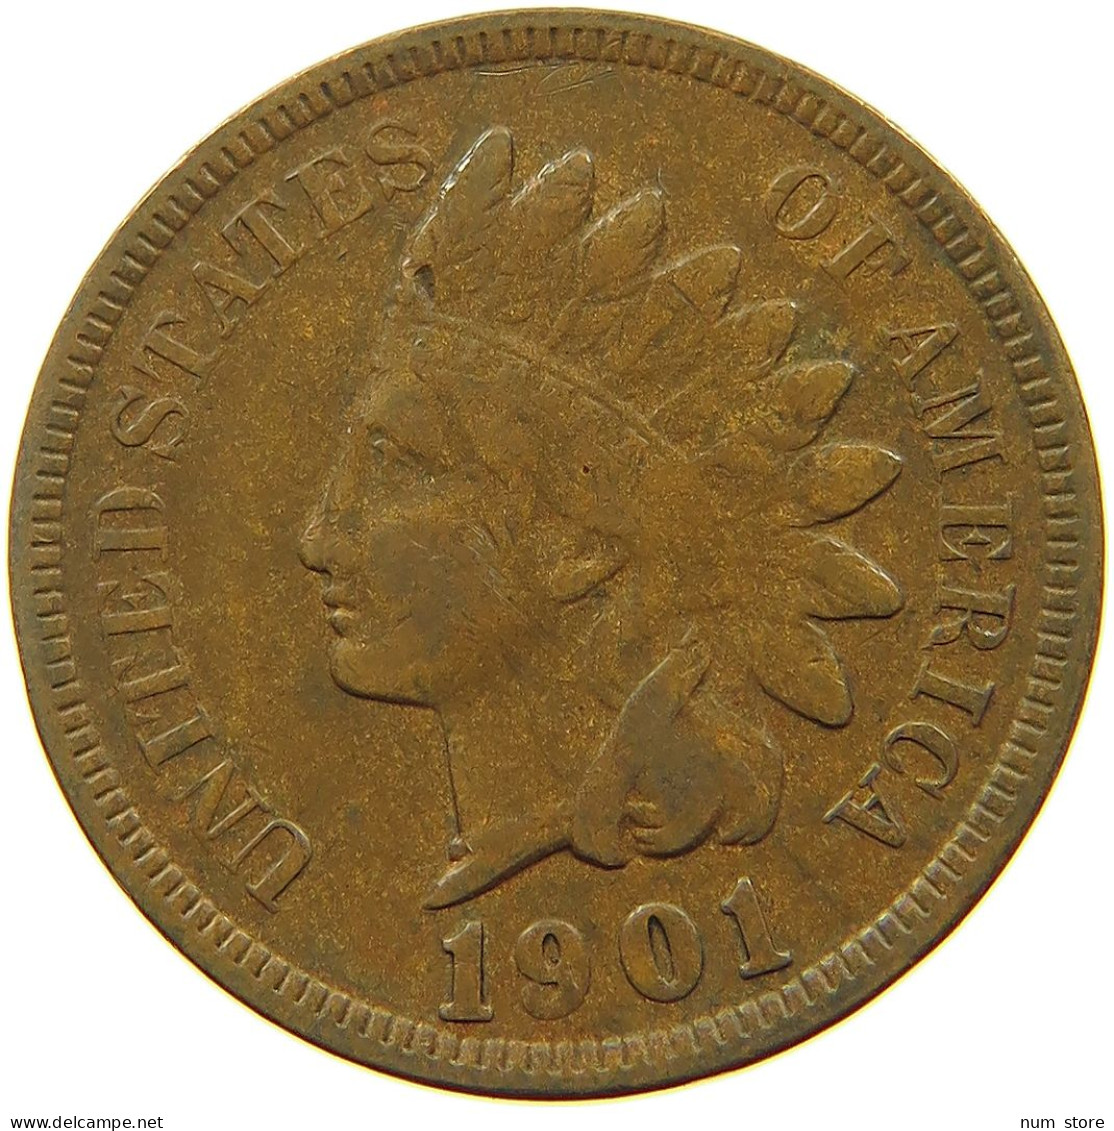 UNITED STATES OF AMERICA CENT 1901 INDIAN HEAD #a094 0291 - 1859-1909: Indian Head